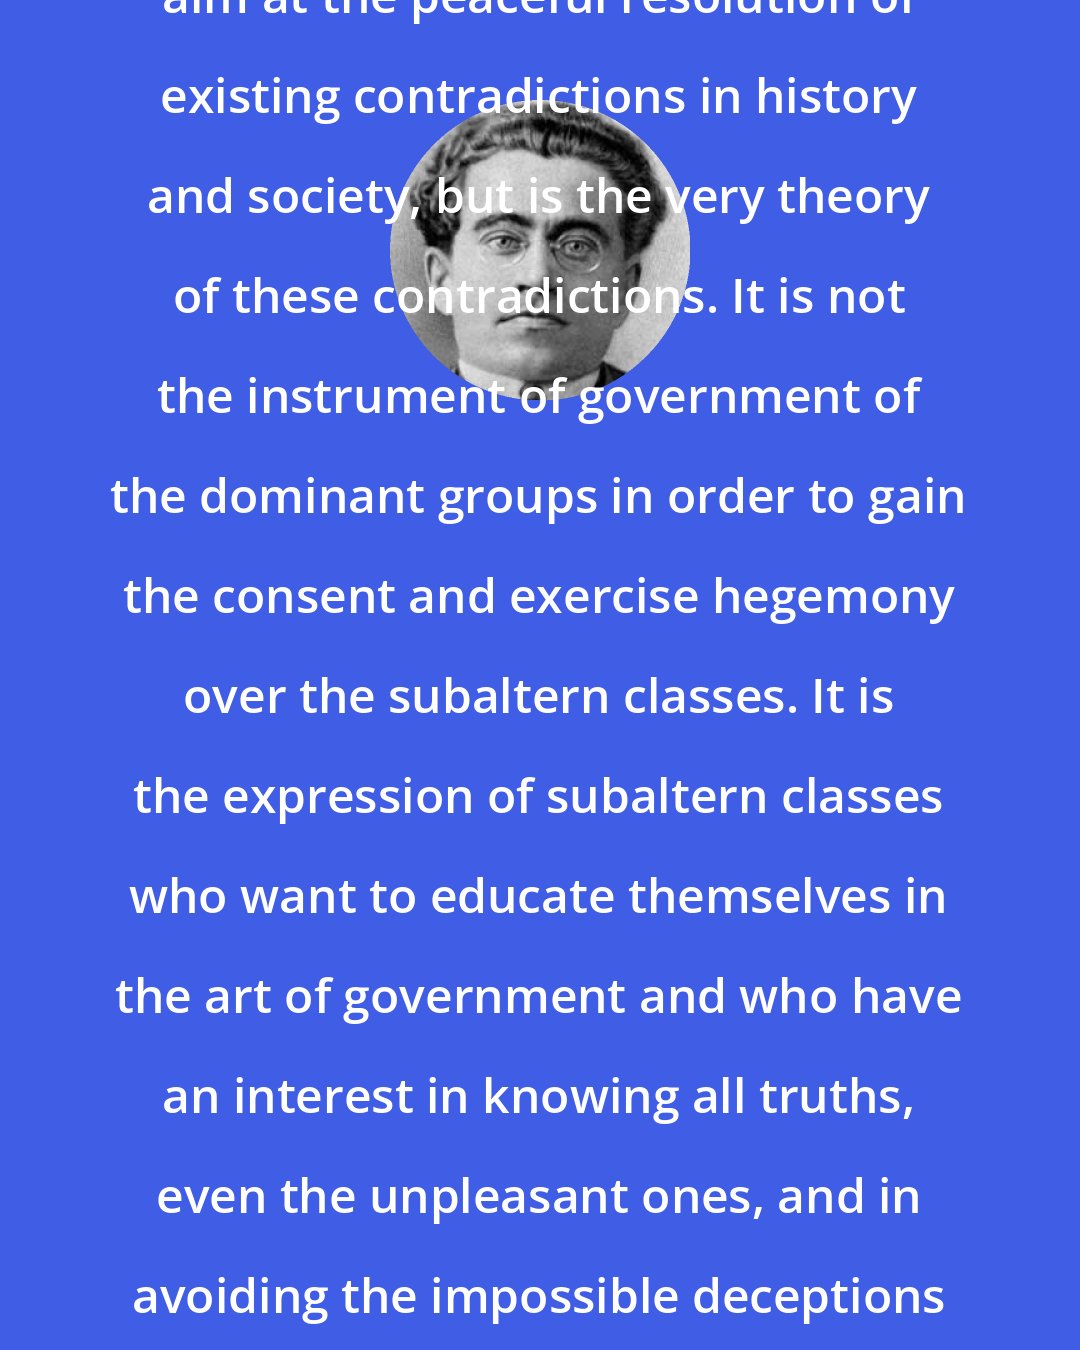 Antonio Gramsci: The philosophy of praxis does not aim at the peaceful resolution of existing contradictions in history and society, but is the very theory of these contradictions. It is not the instrument of government of the dominant groups in order to gain the consent and exercise hegemony over the subaltern classes. It is the expression of subaltern classes who want to educate themselves in the art of government and who have an interest in knowing all truths, even the unpleasant ones, and in avoiding the impossible deceptions of the upper class, and even more their own.